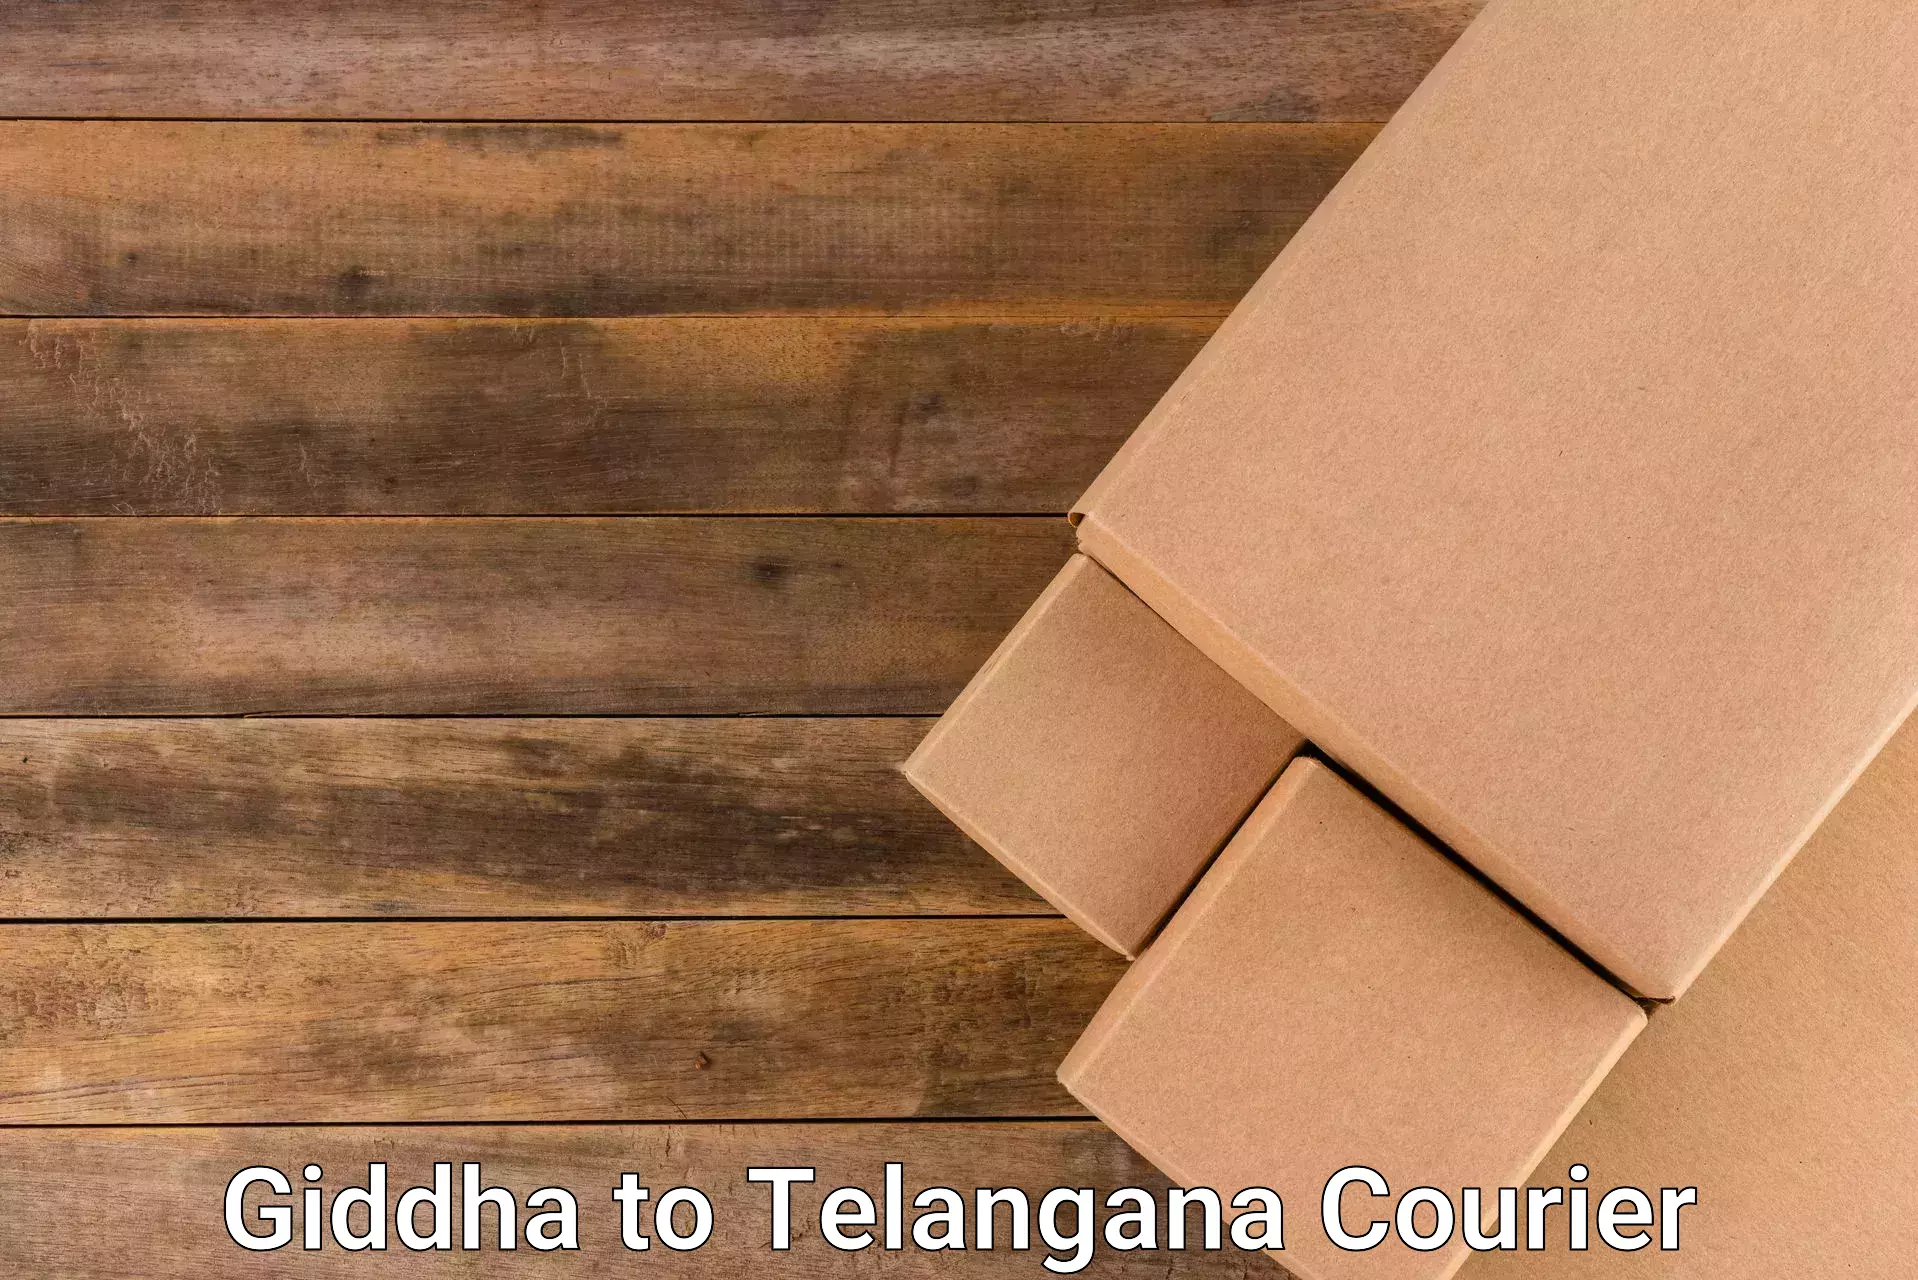 Courier service partnerships in Giddha to Gollapalli